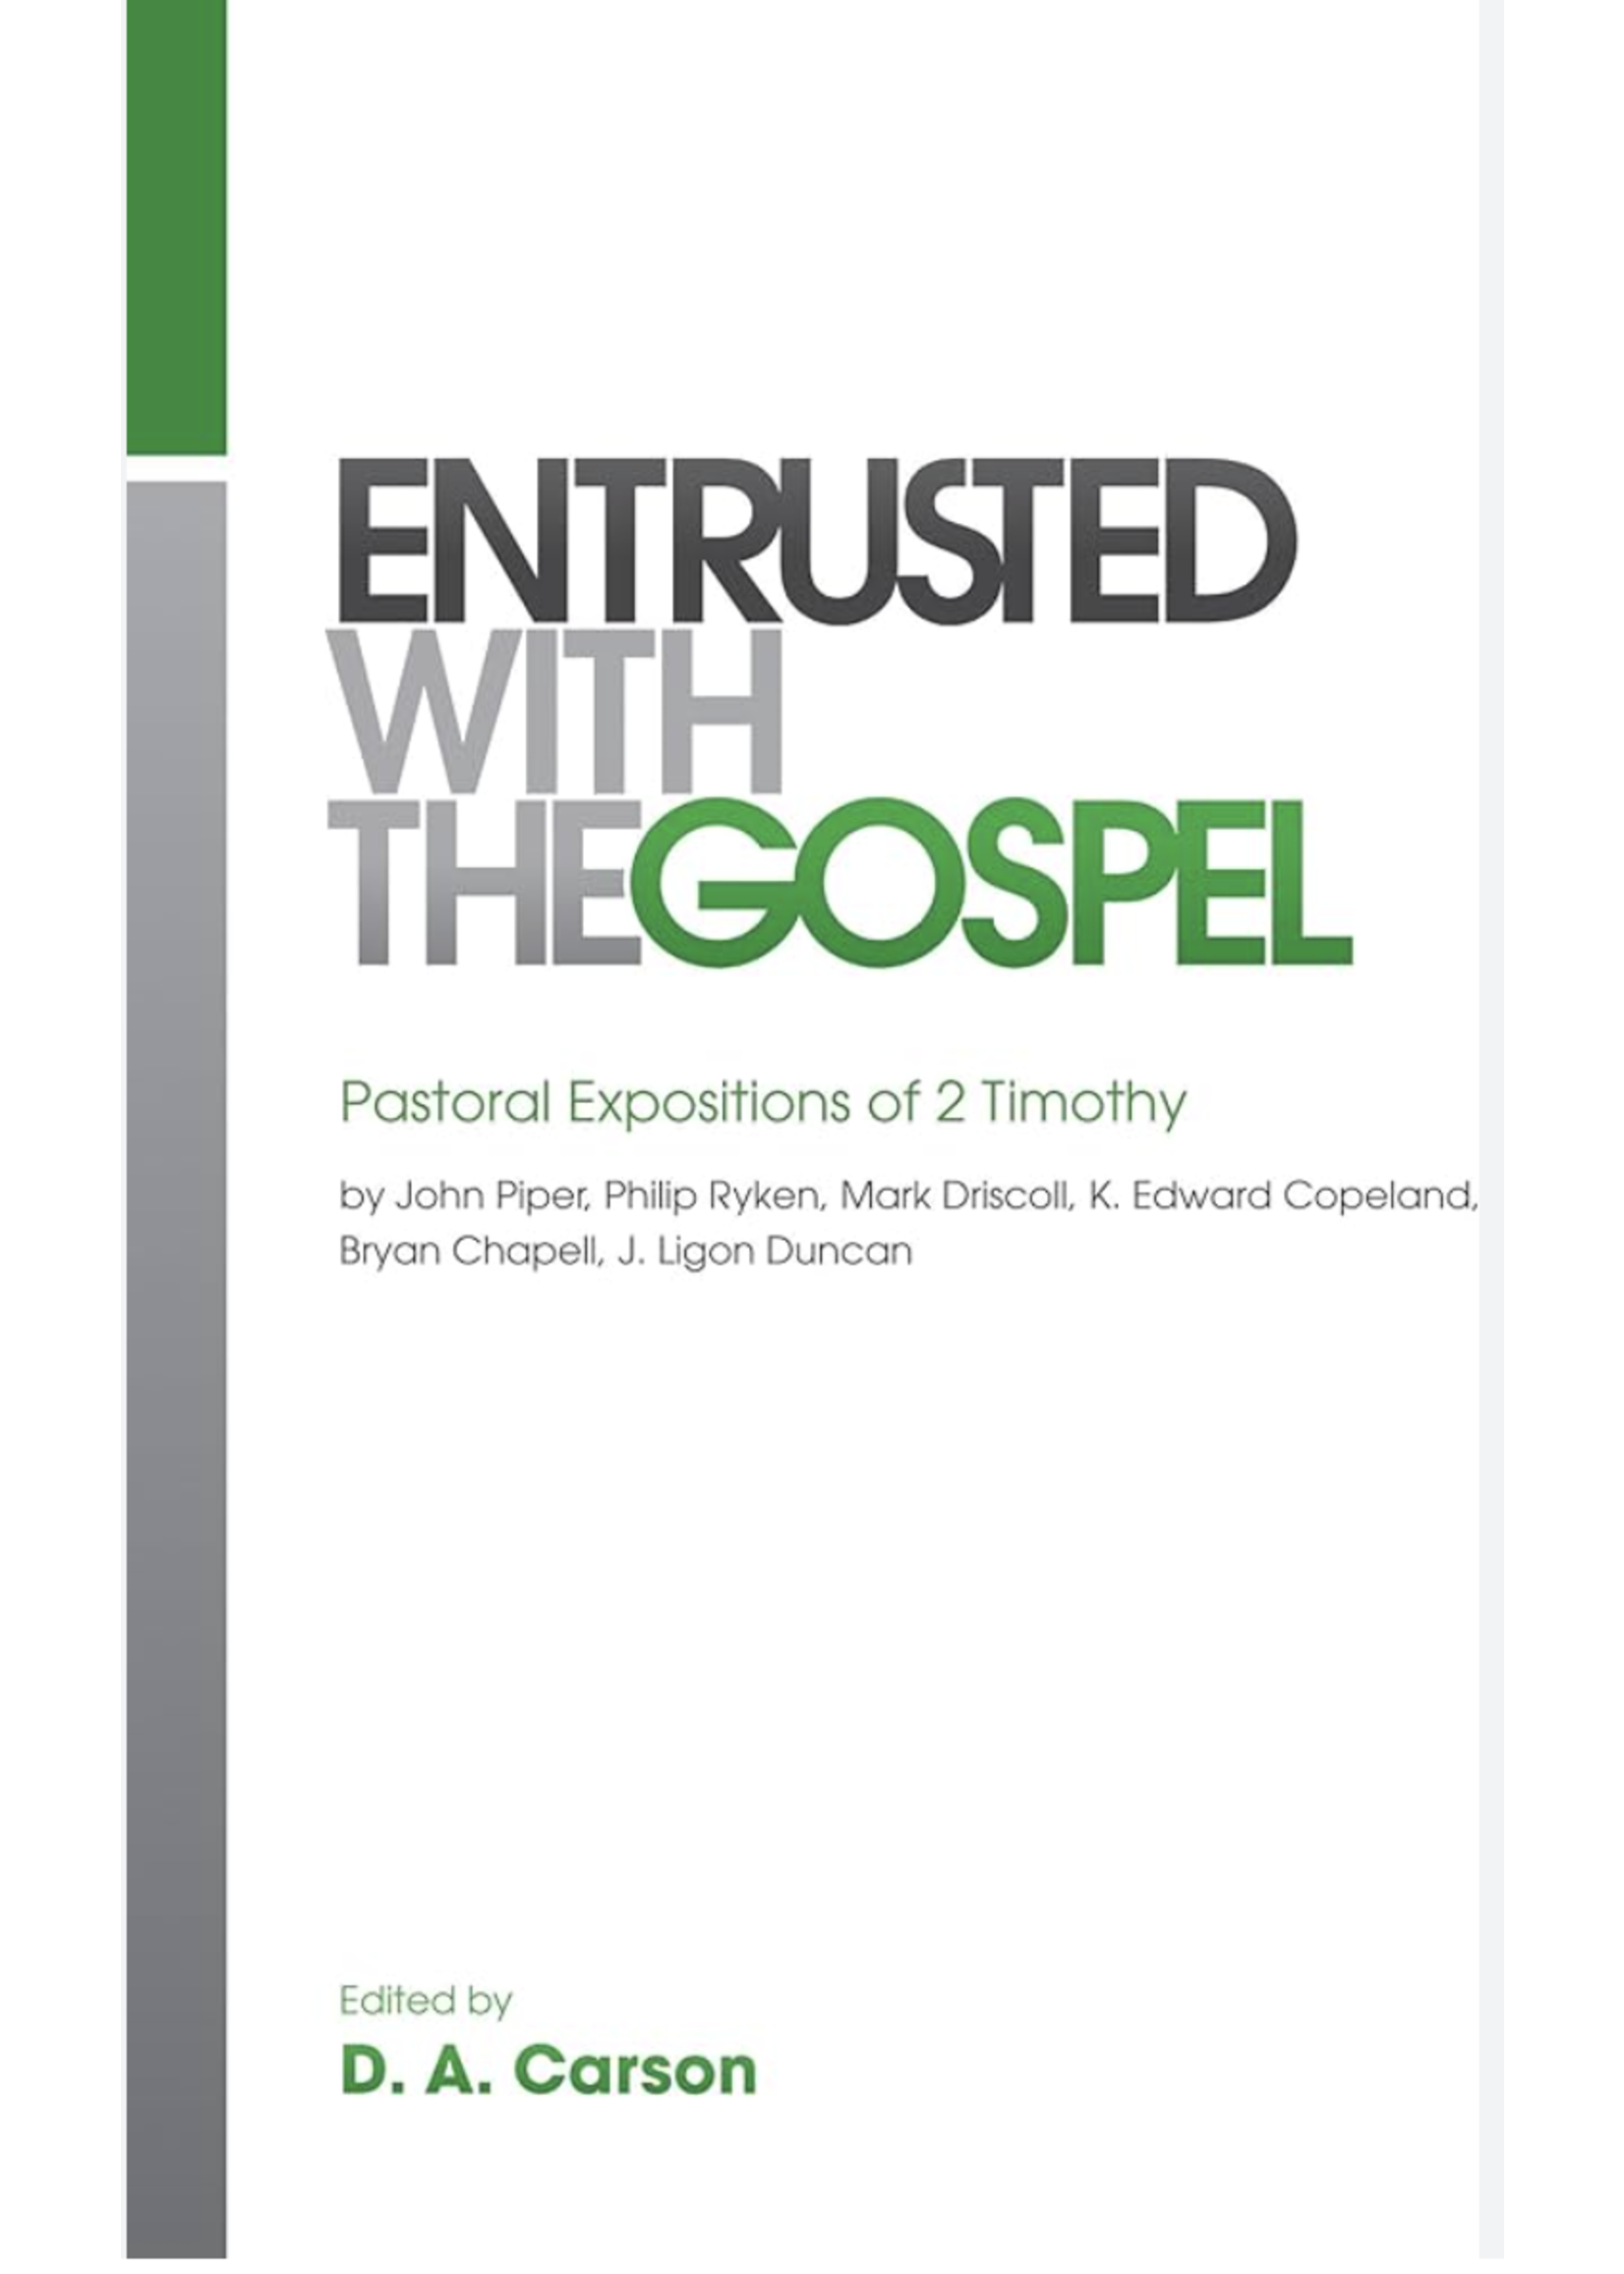 ENTRUSTED WITH THE GOSPEL